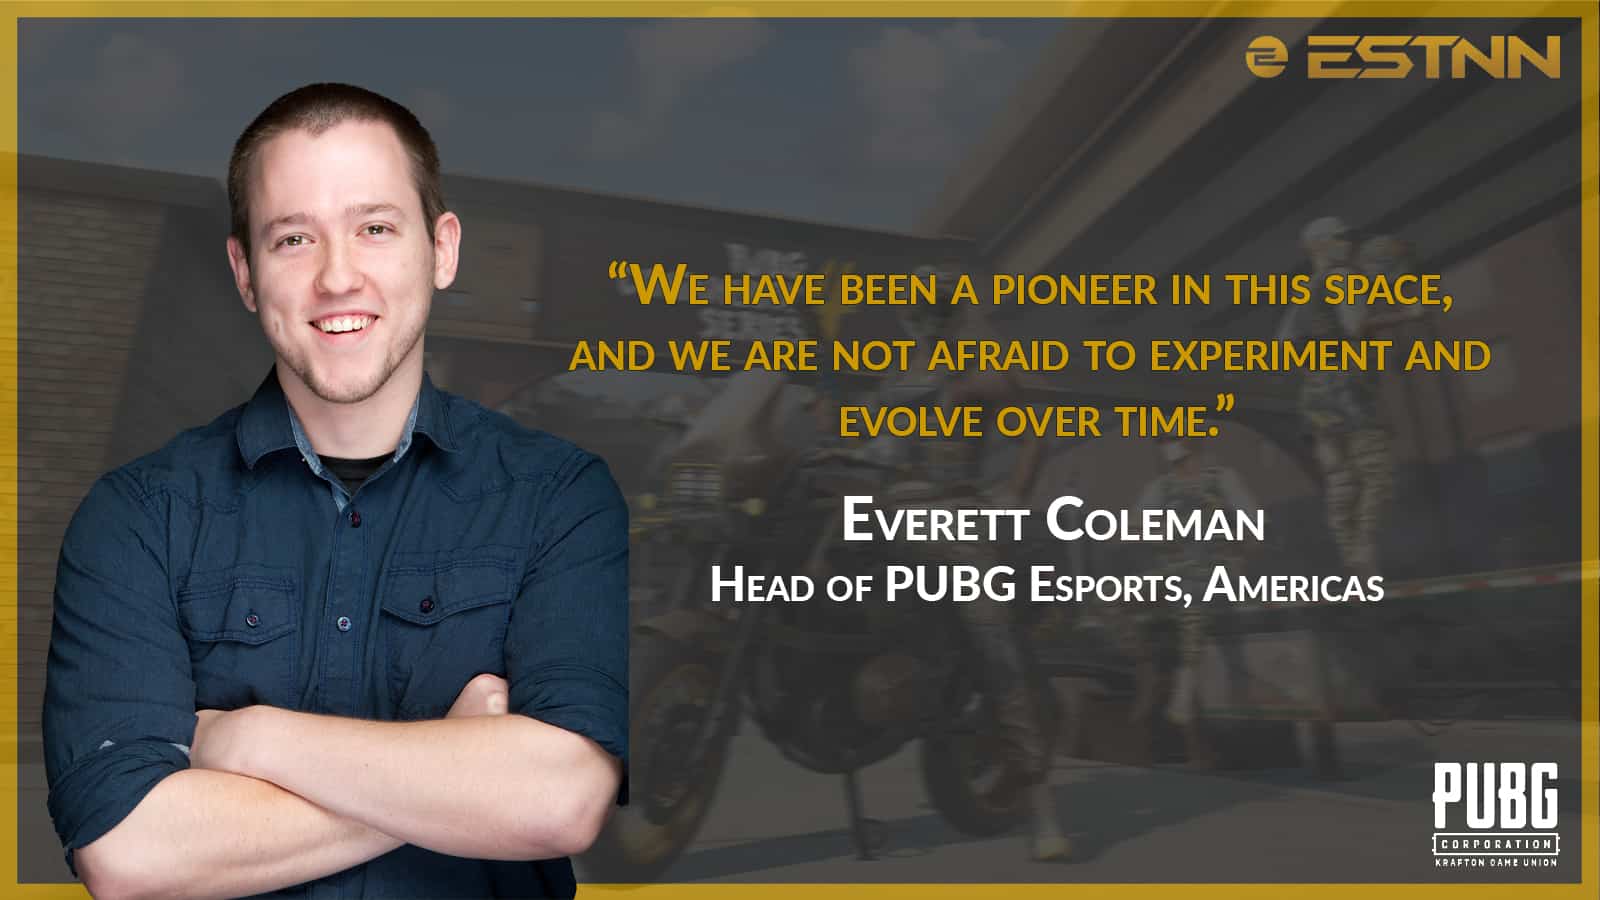 “Global offline events will always be the crown jewel of PUBG Esports” — A Chat With Everett Coleman Head of PUBG Esports, Americas